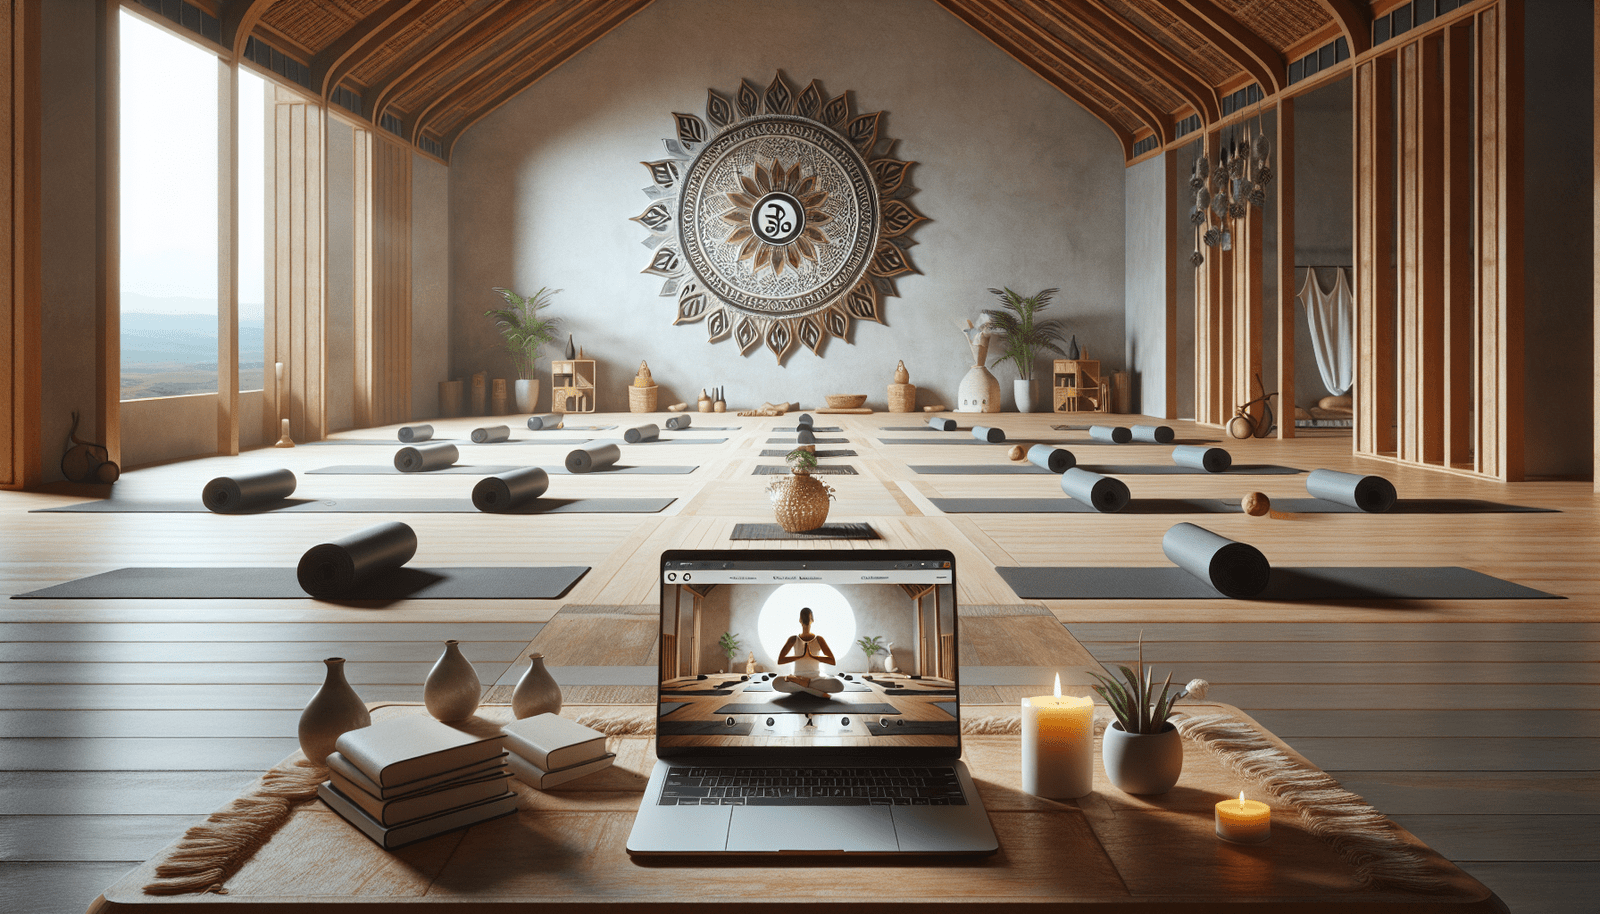 Are There Online Yoga Certifications For Those Who Want To Teach?